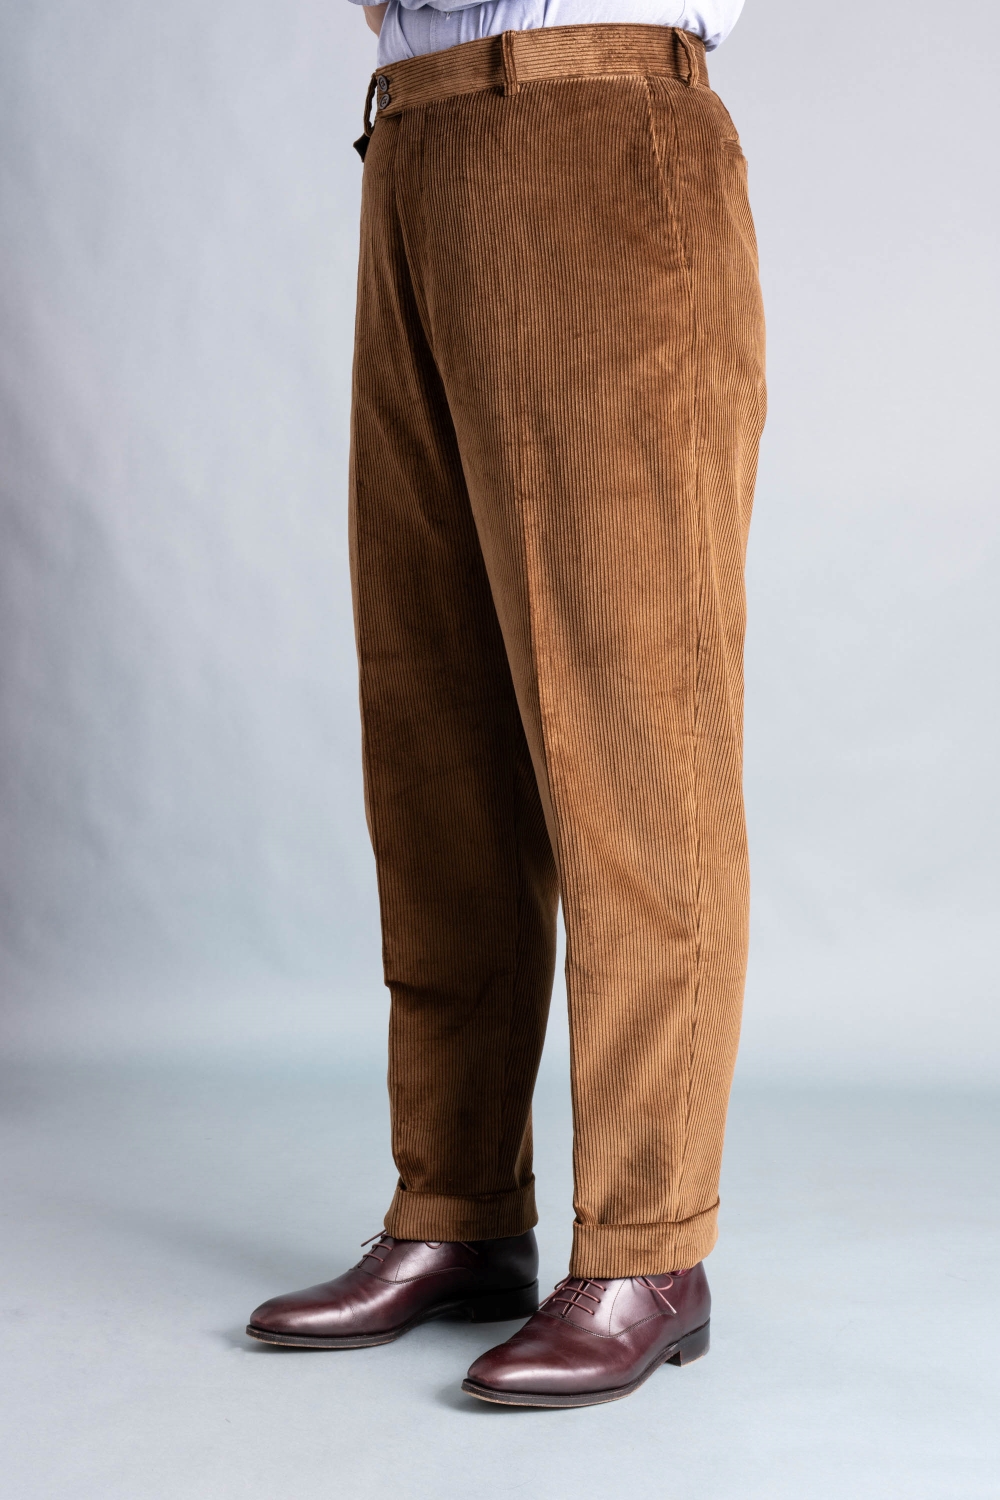 Bottle Green Corduroy Trousers | Men's Country Clothing | Cordings